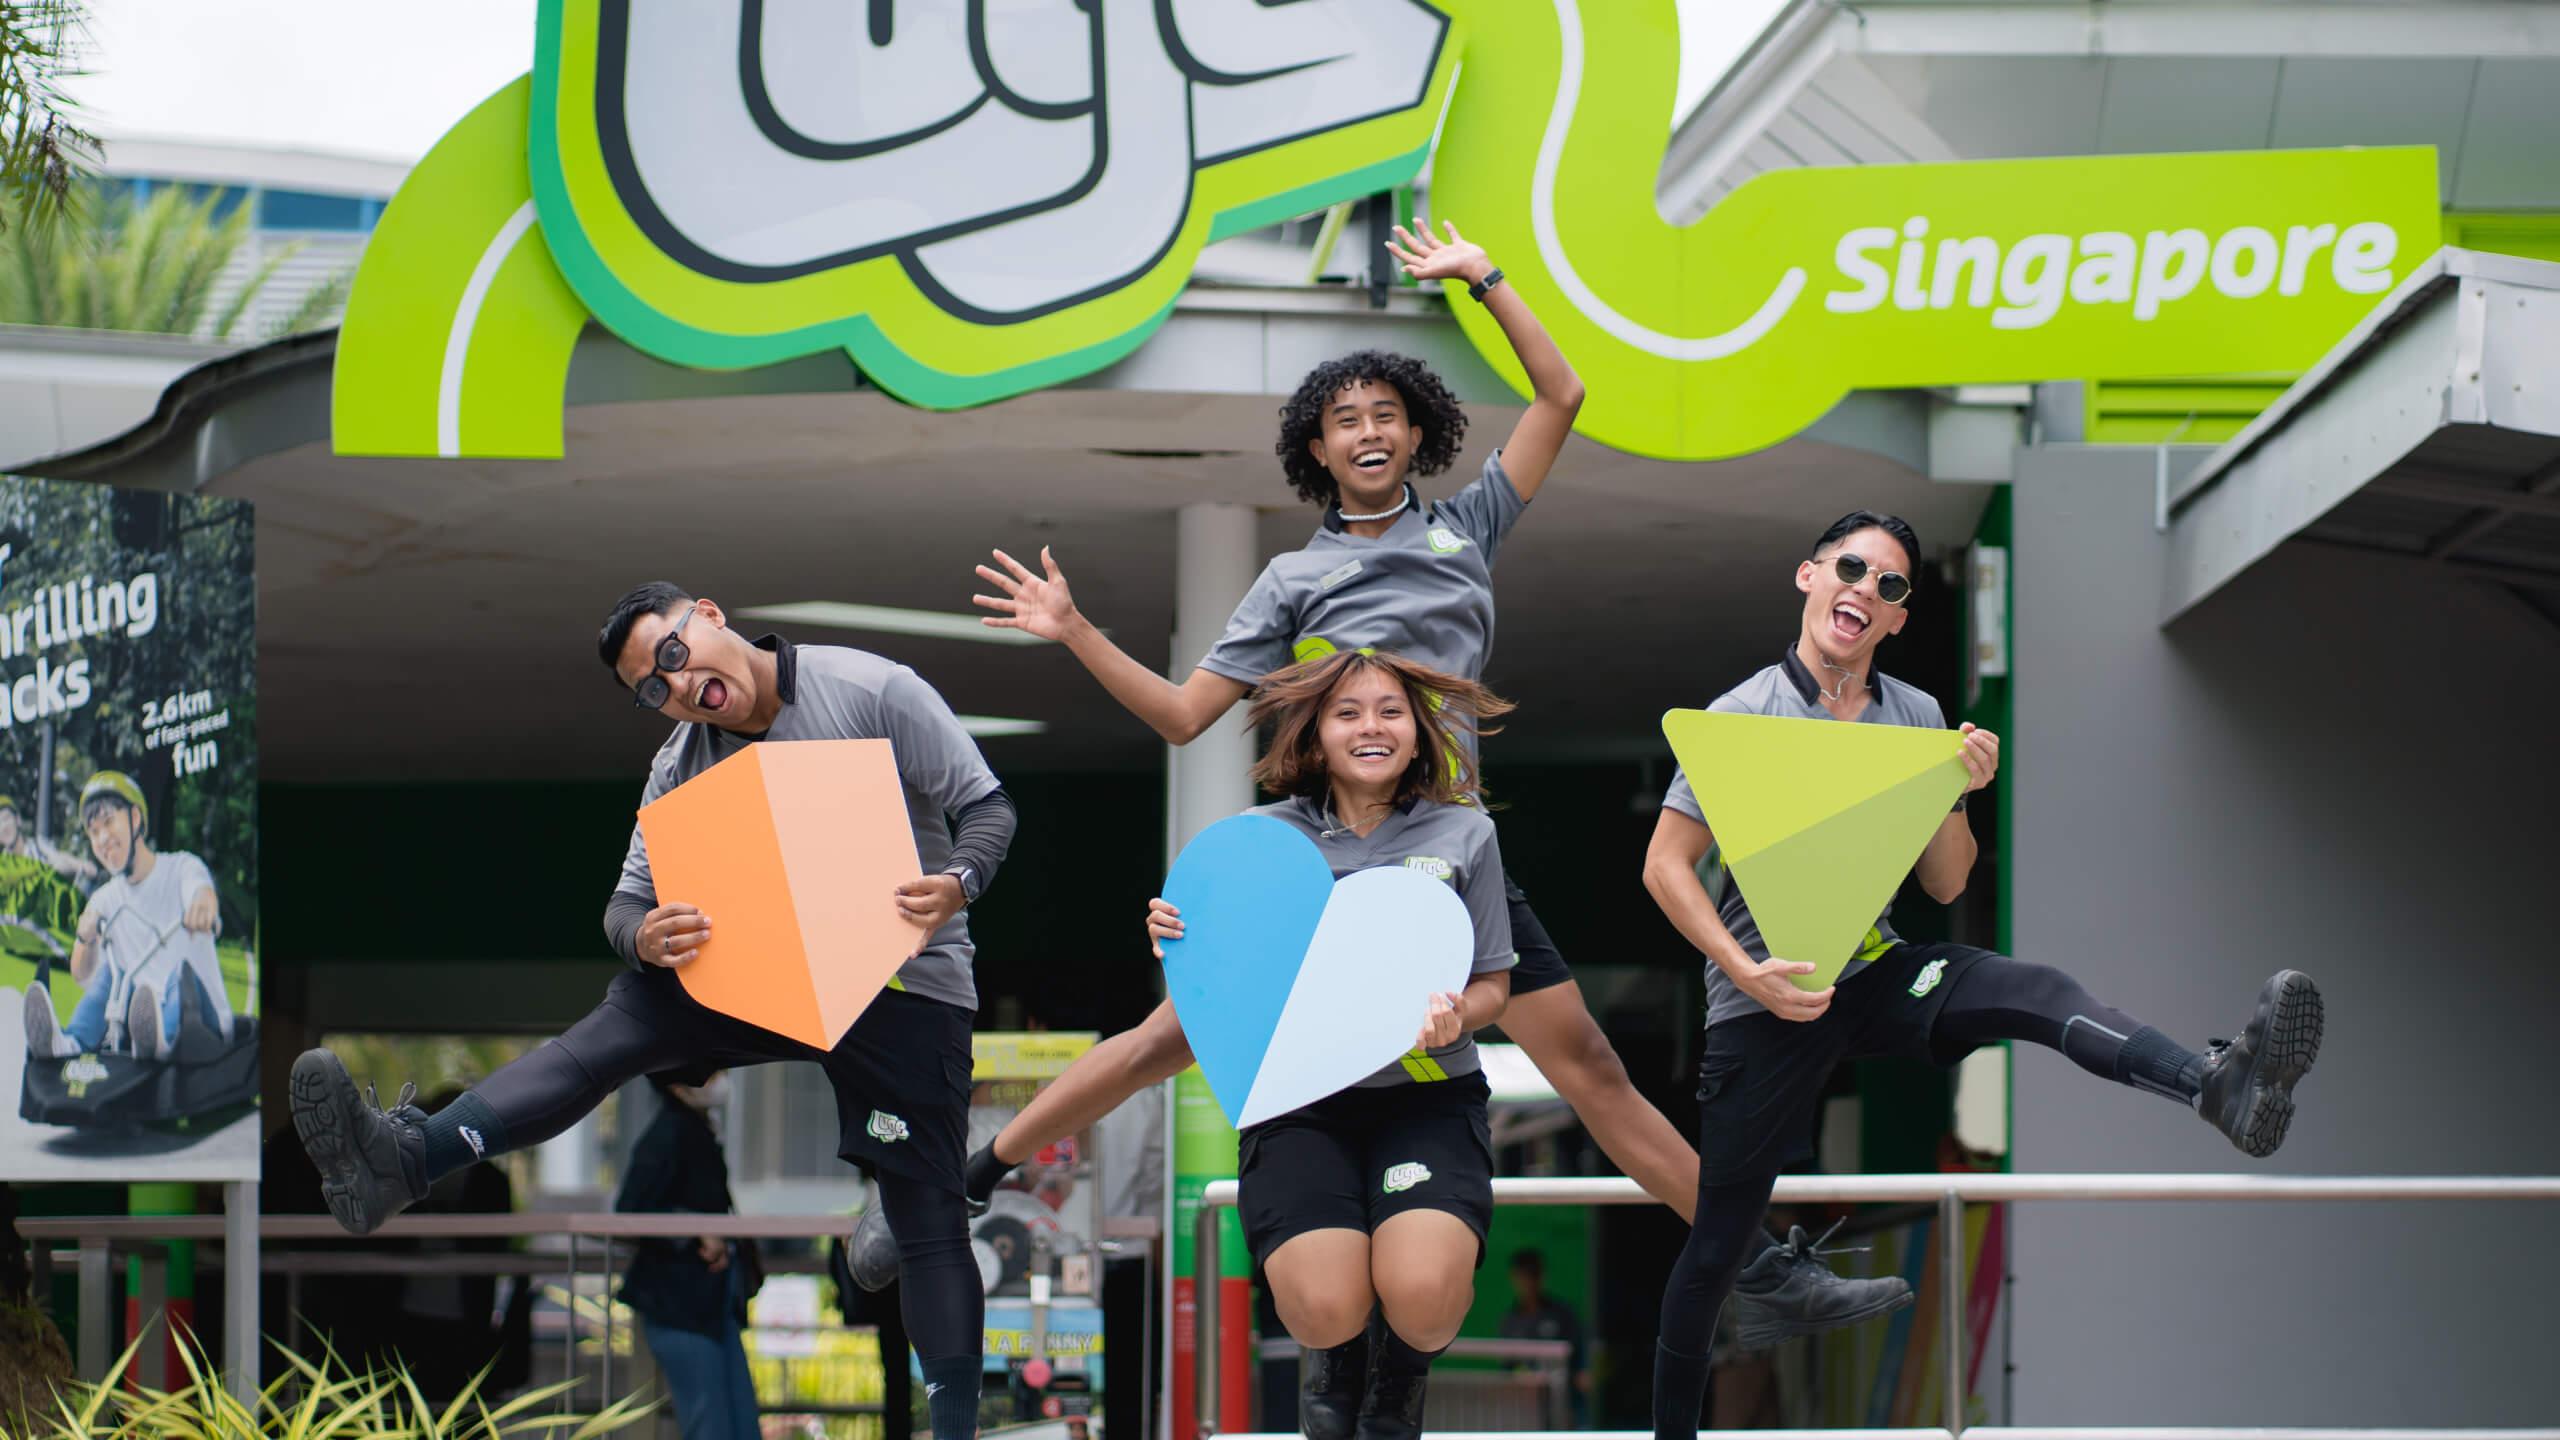 Four Skyline Luge Singapore employees jump in the air with colourful cardboard cutouts.